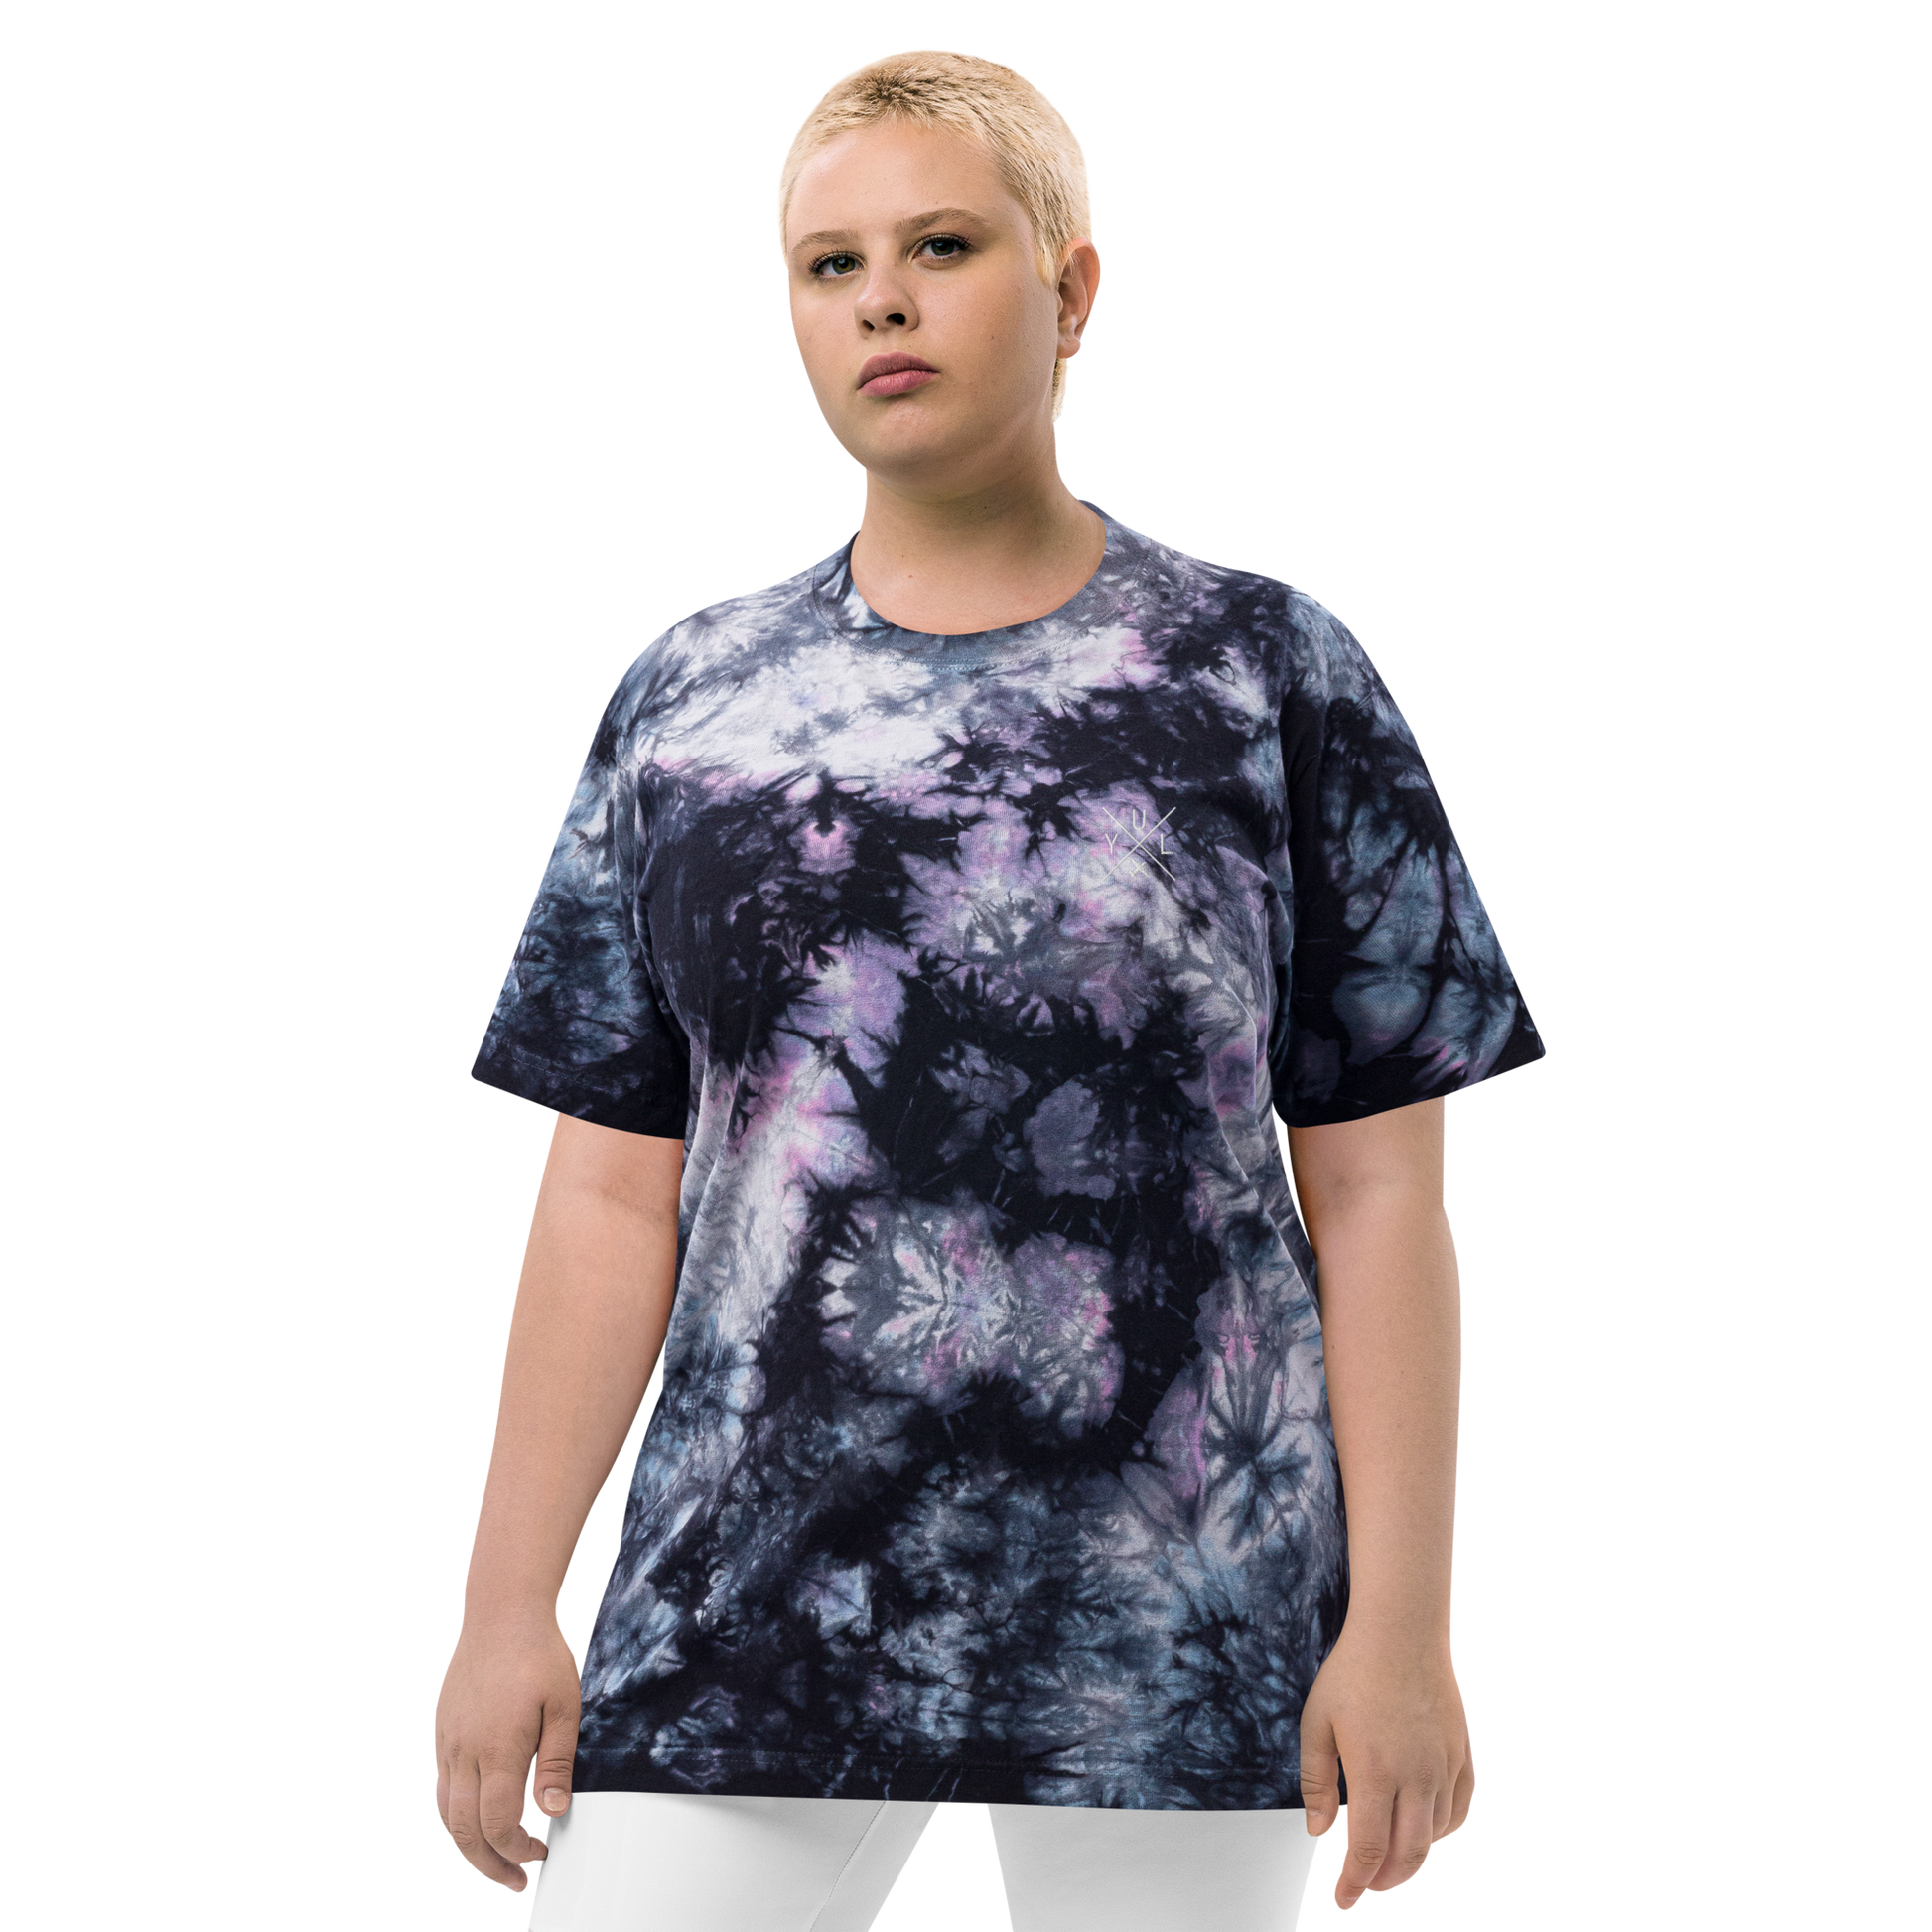 YHM Designs - YUL Montreal Oversized Tie-Dye T-Shirt - Crossed-X Design with Airport Code and Vintage Propliner - White Embroidery - Image 05